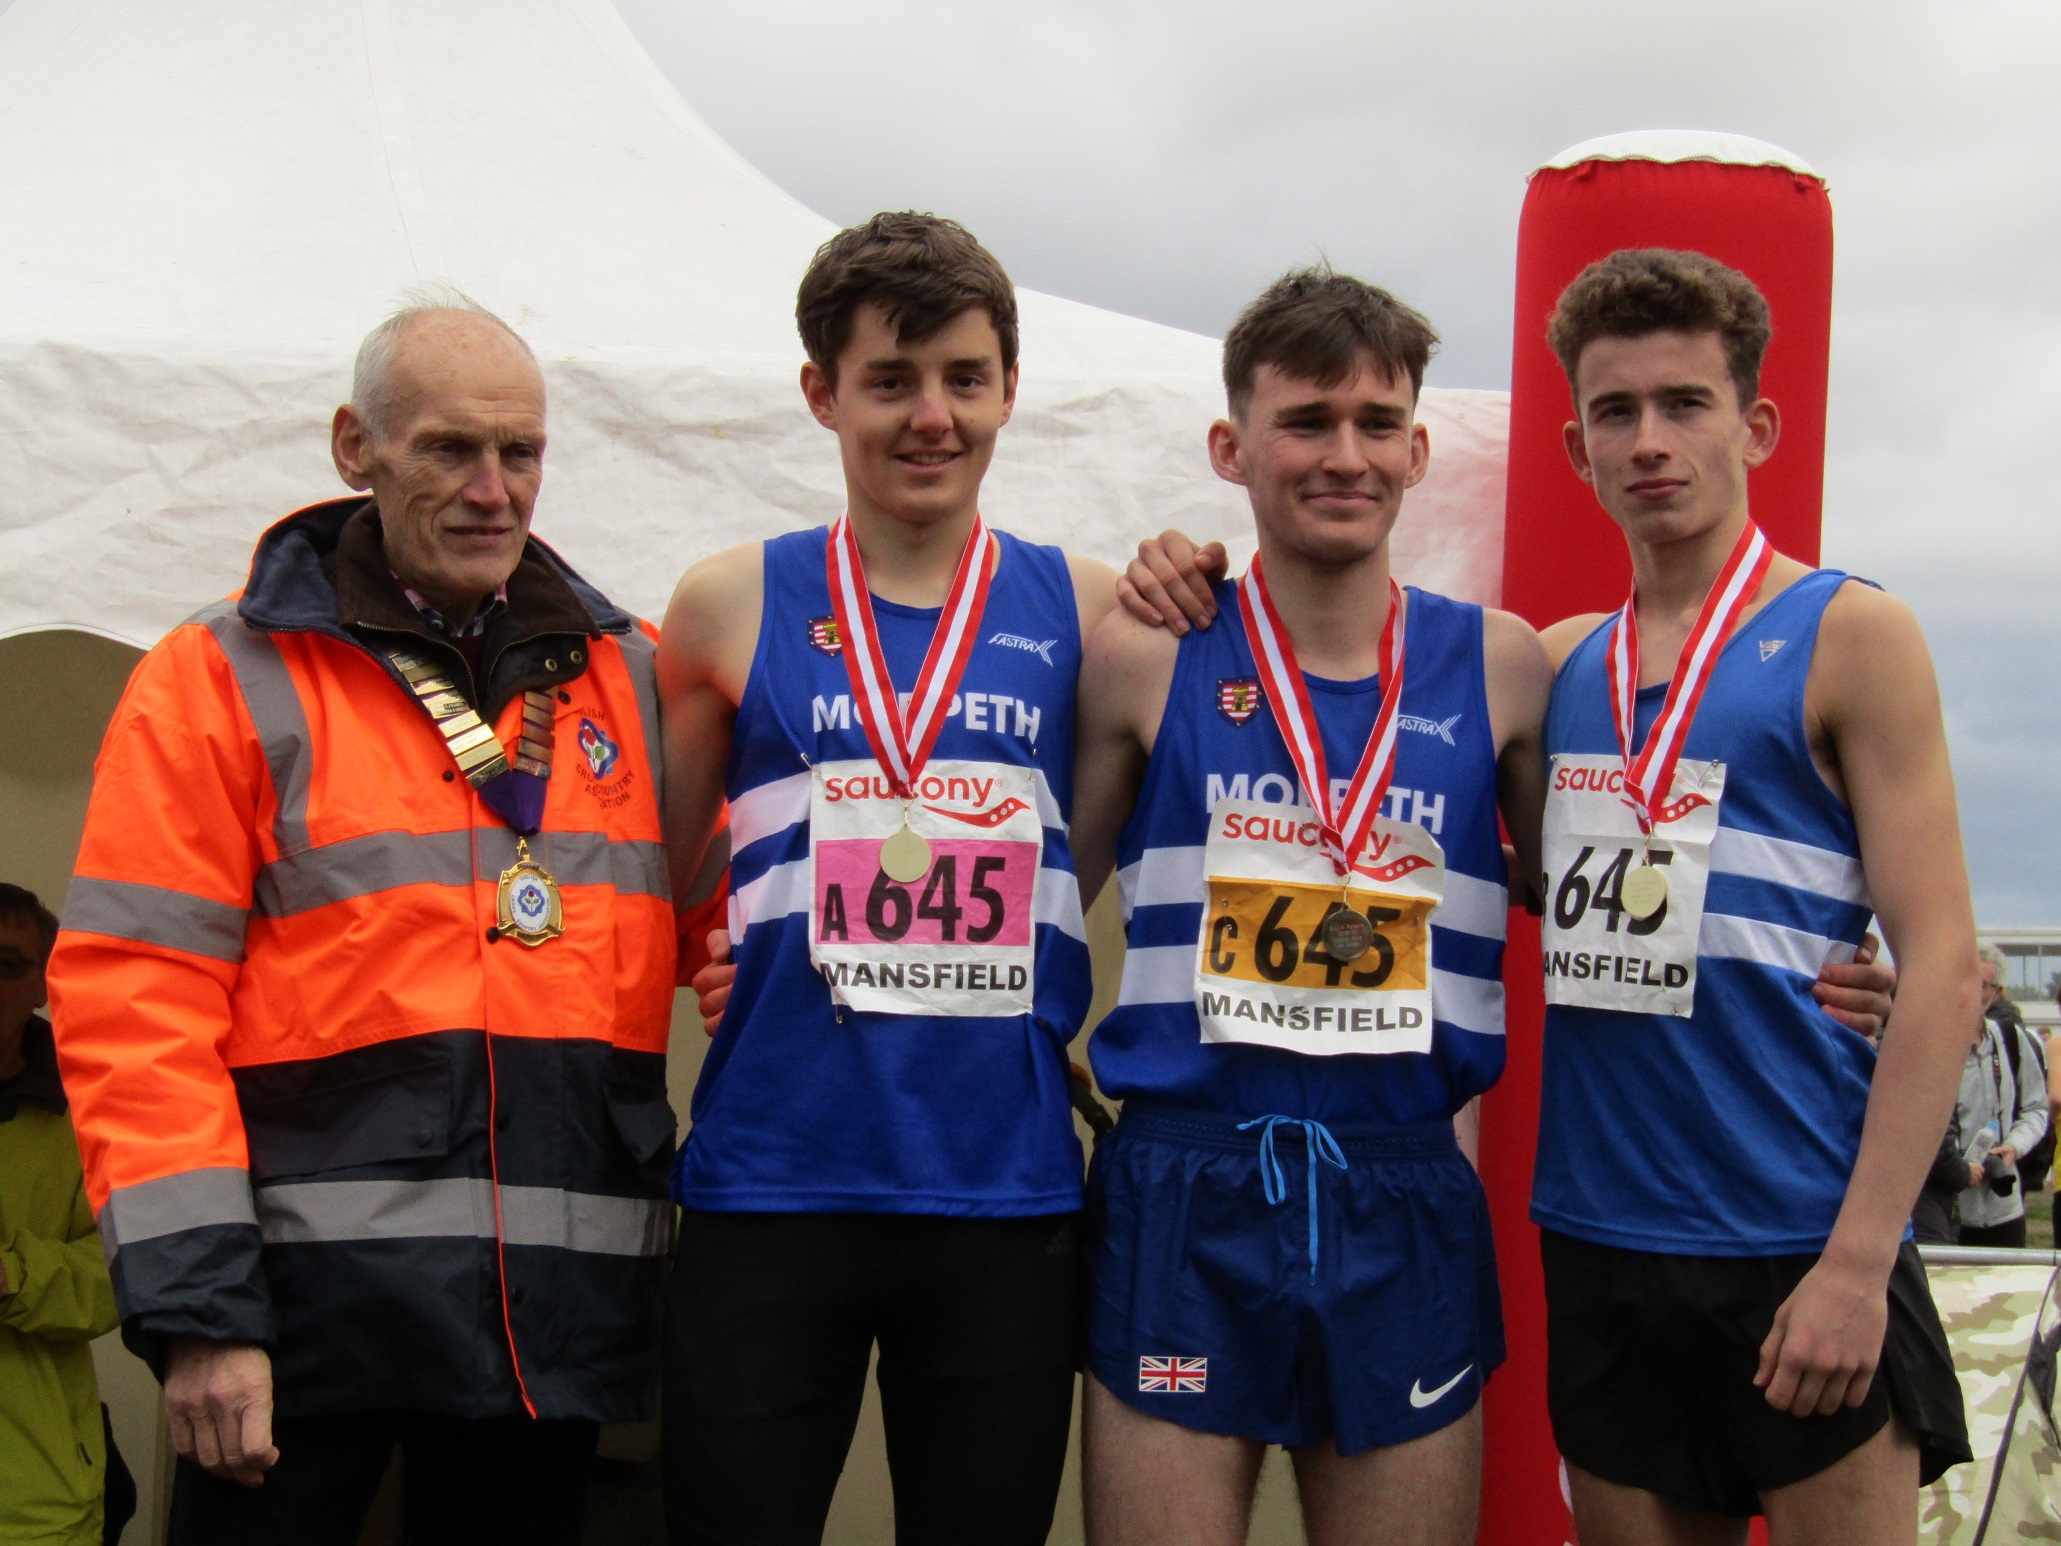 Leeds and Morpeth Claim National Cross Country Relays Titles